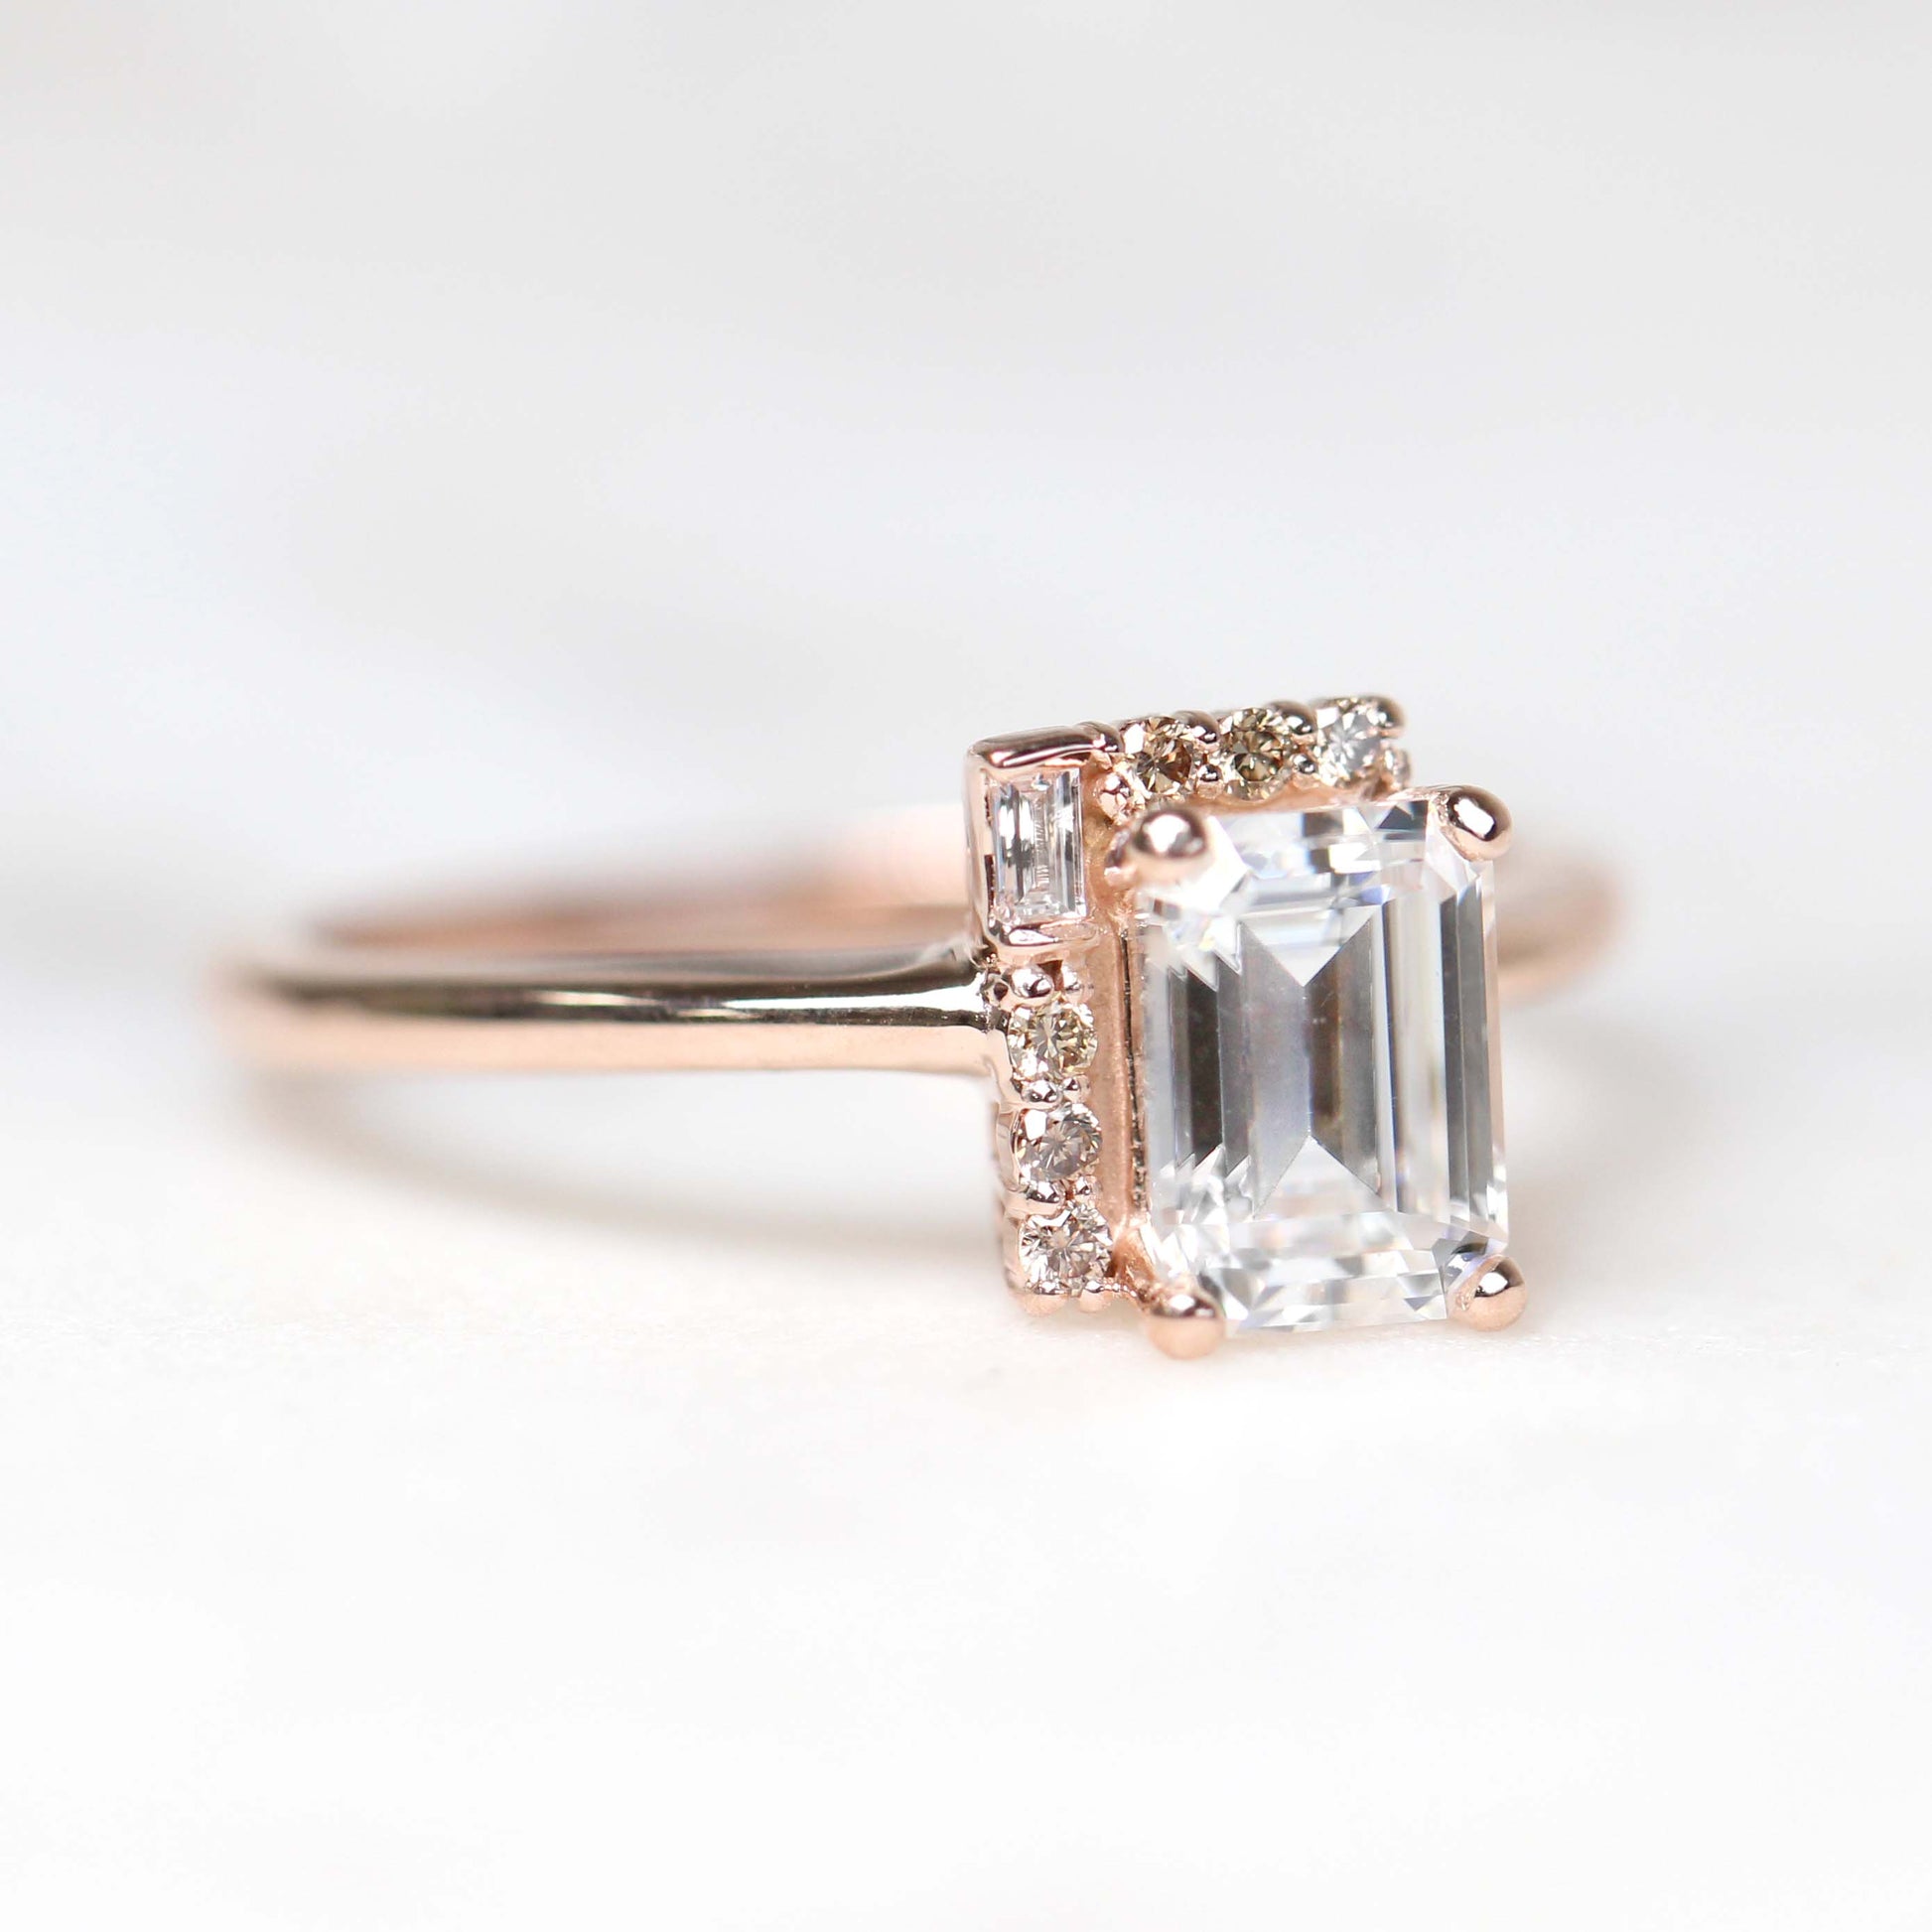 Celine Ring with a 0.92 Carat Emerald Cut Moissanite and Cognac Accent Diamonds in 14k Rose Gold - Ready to Size and Ship - Midwinter Co. Alternative Bridal Rings and Modern Fine Jewelry